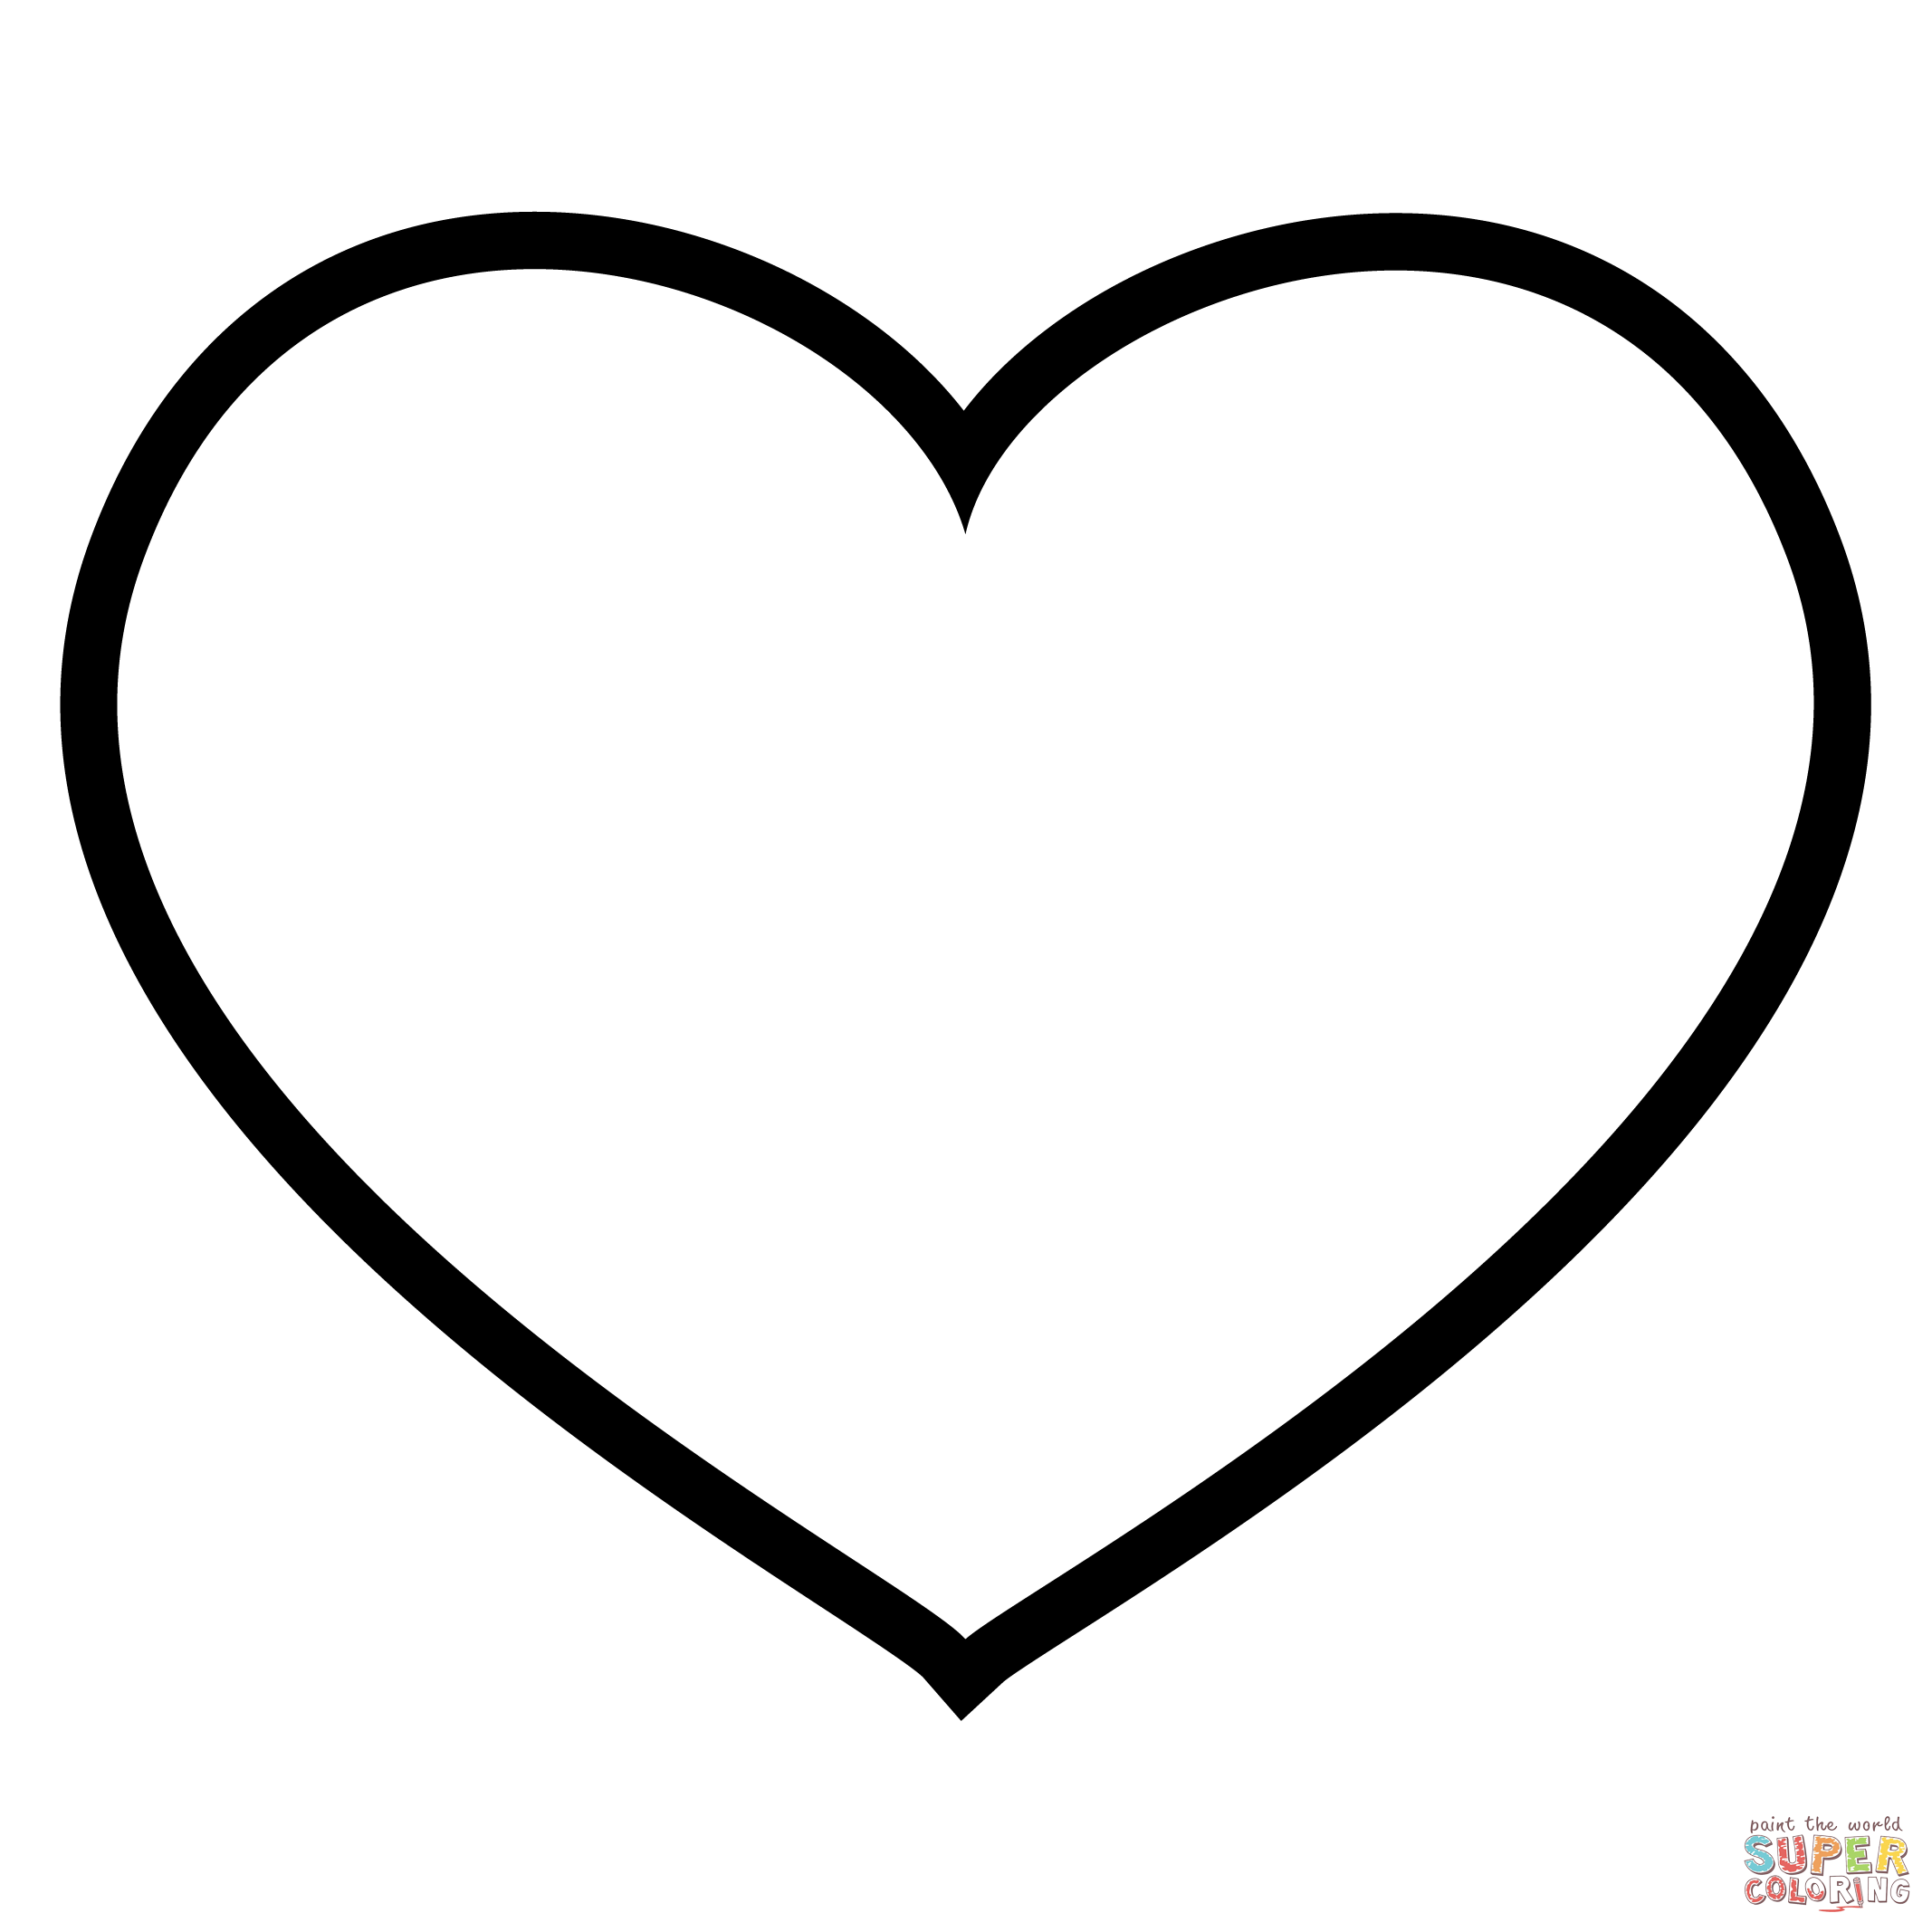 Yellow heart emoji coloring page free printable coloring pages